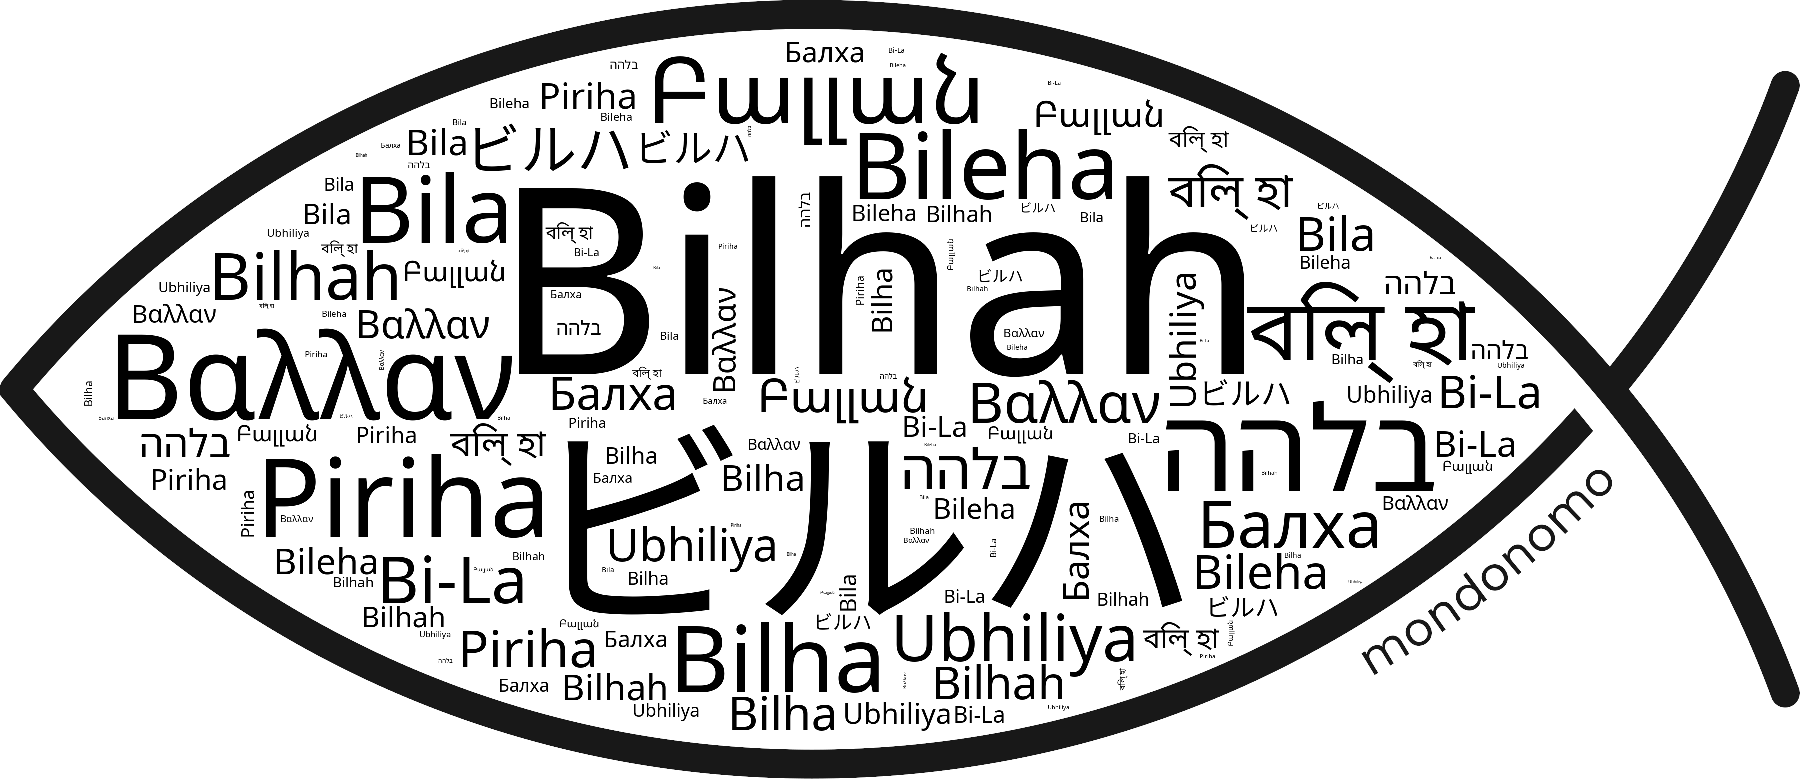 Name Bilhah in the world's Bibles